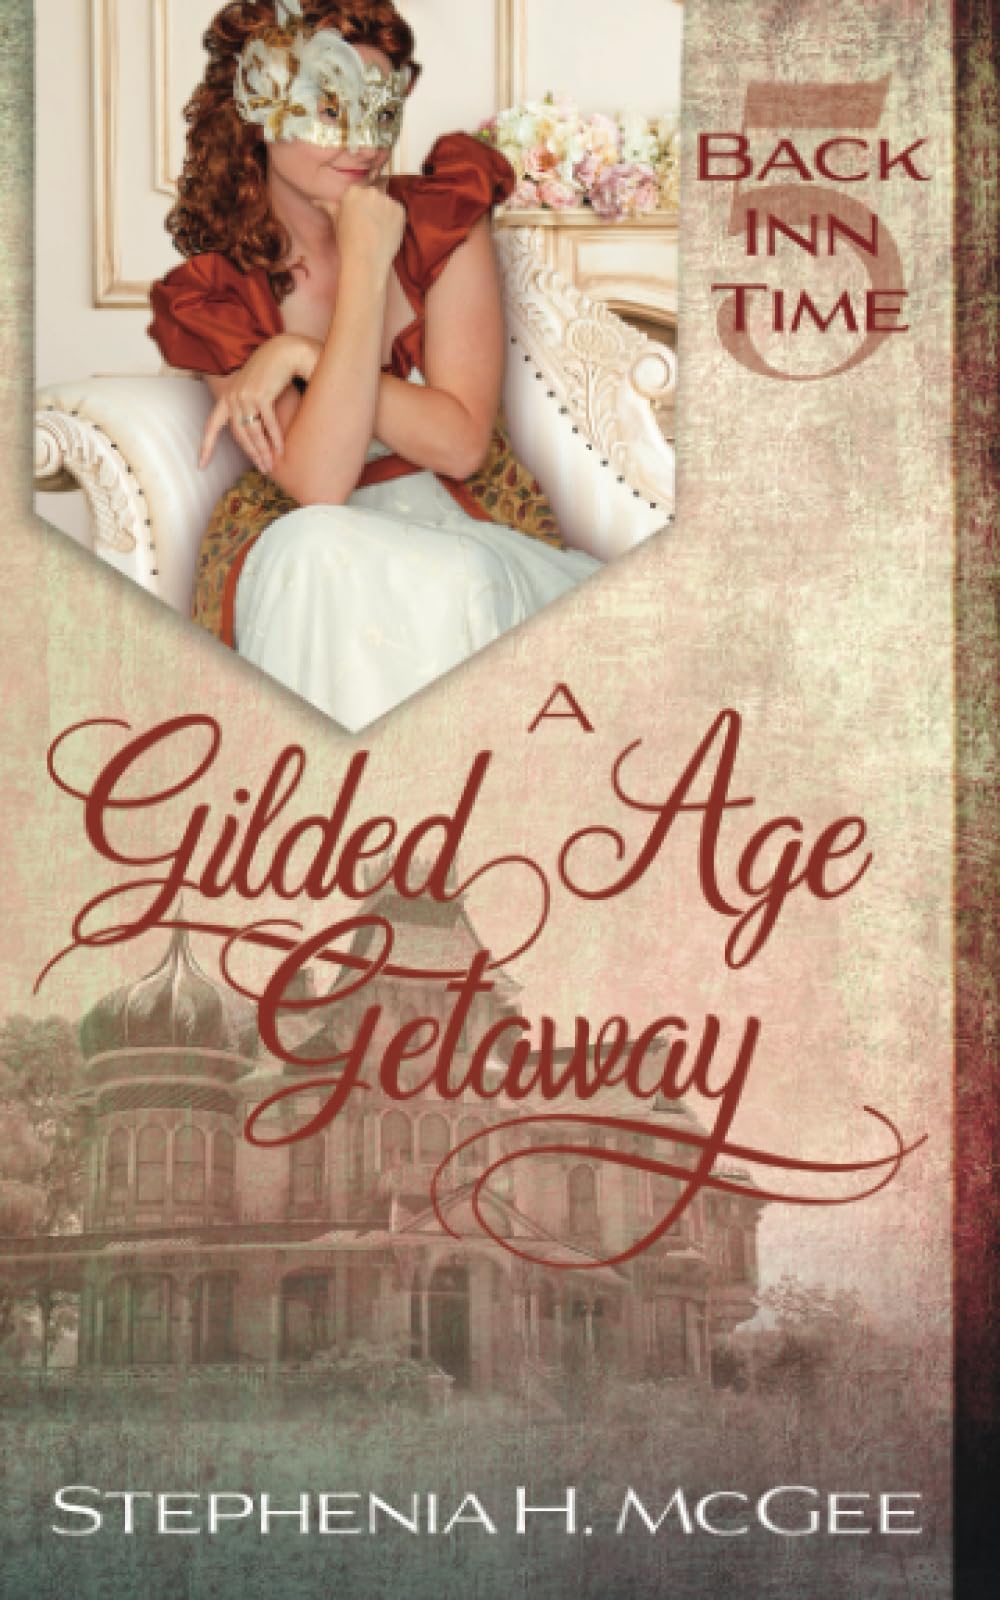 A Gilded Age Getaway - A Time Travel Historical Romance : The Back Inn Time Series, Book 5 of 5 (Paperback) Stephenia H. McGee